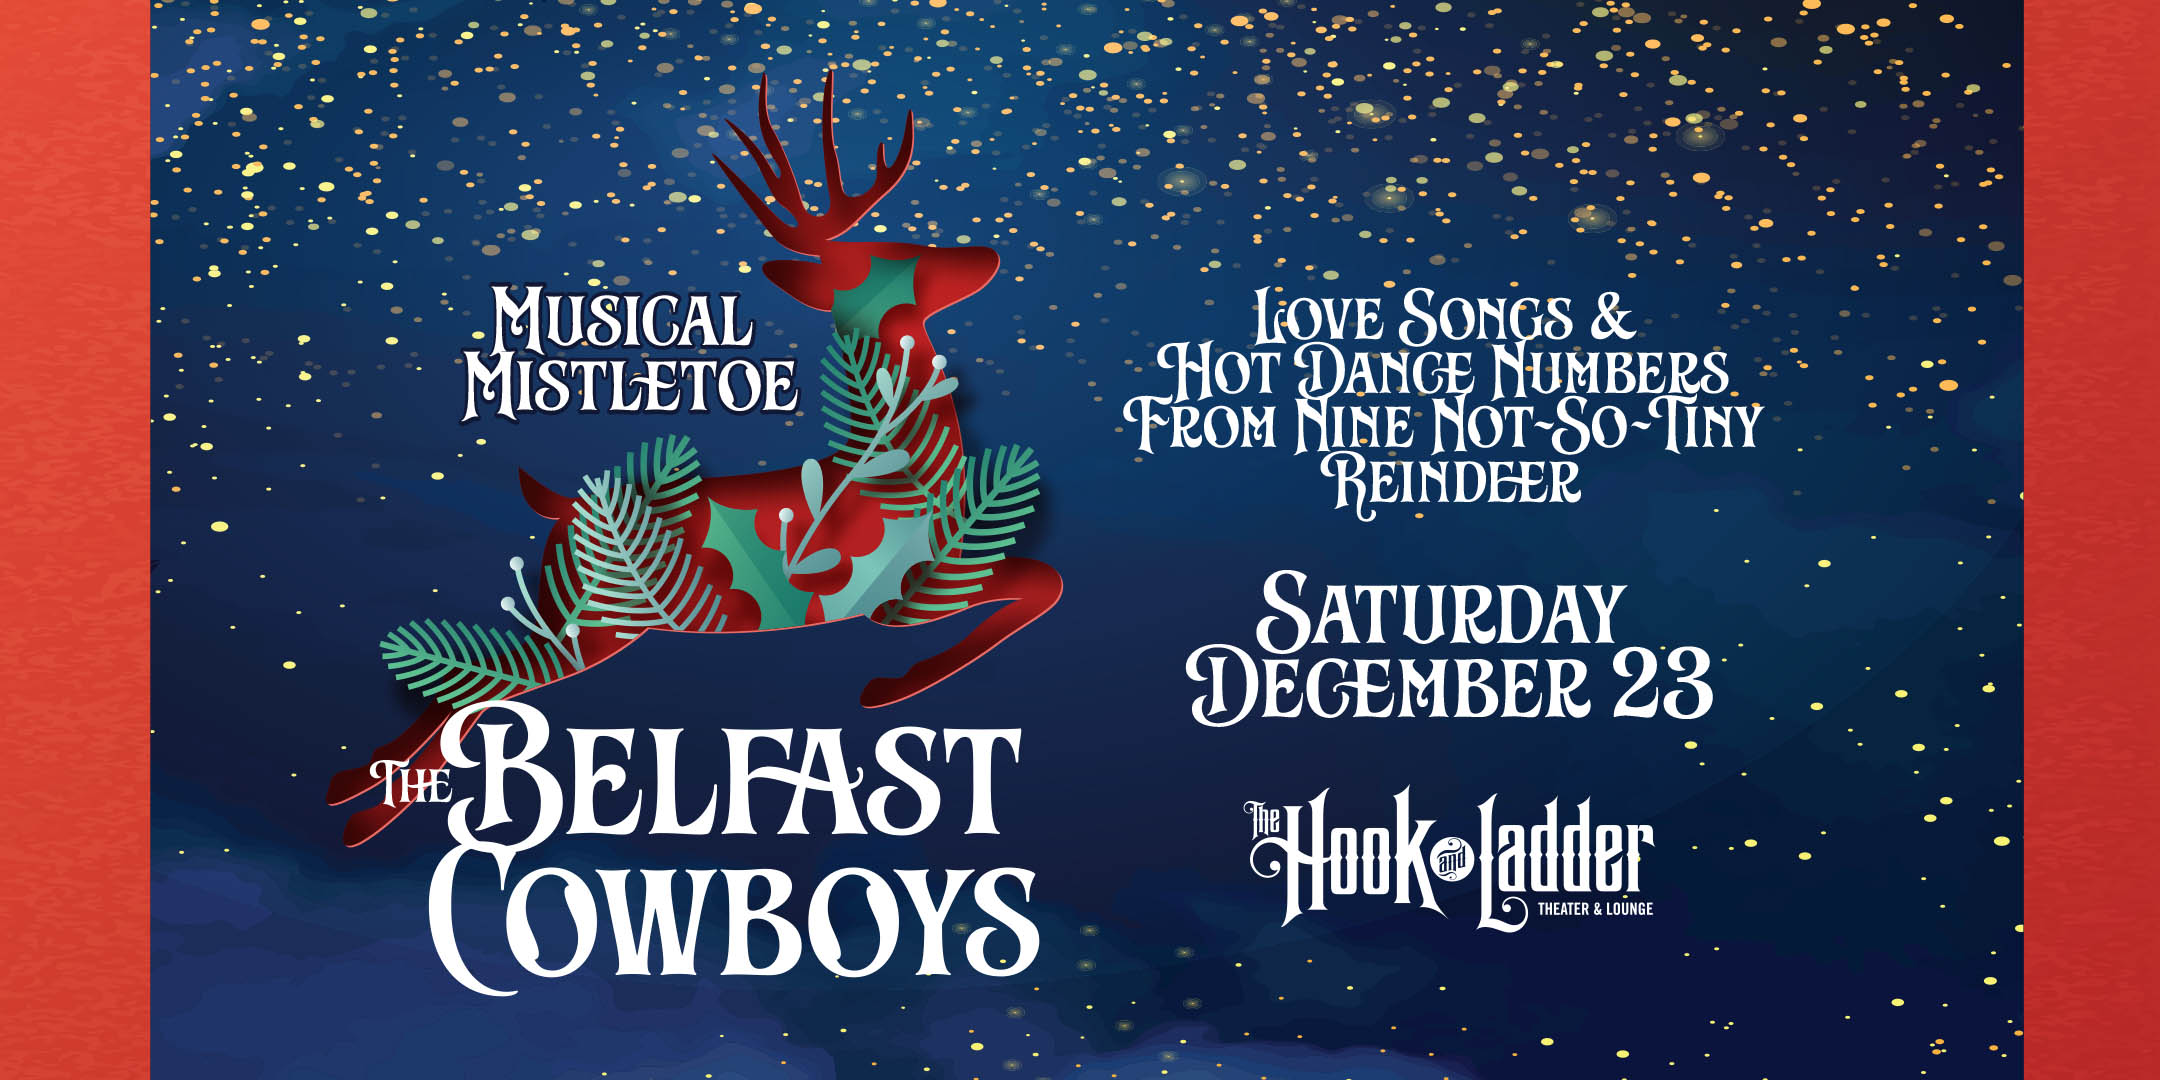 The Belfast Cowboys - Musical Mistletoe! Love Songs & Hot Dance Numbers From Nine Not-So-Tiny Reindeer Saturday, December 23 at The Hook and Ladder Theater Doors 7pm / Music 7:30pm / 21+ $20 Advance / $25 Day of Show